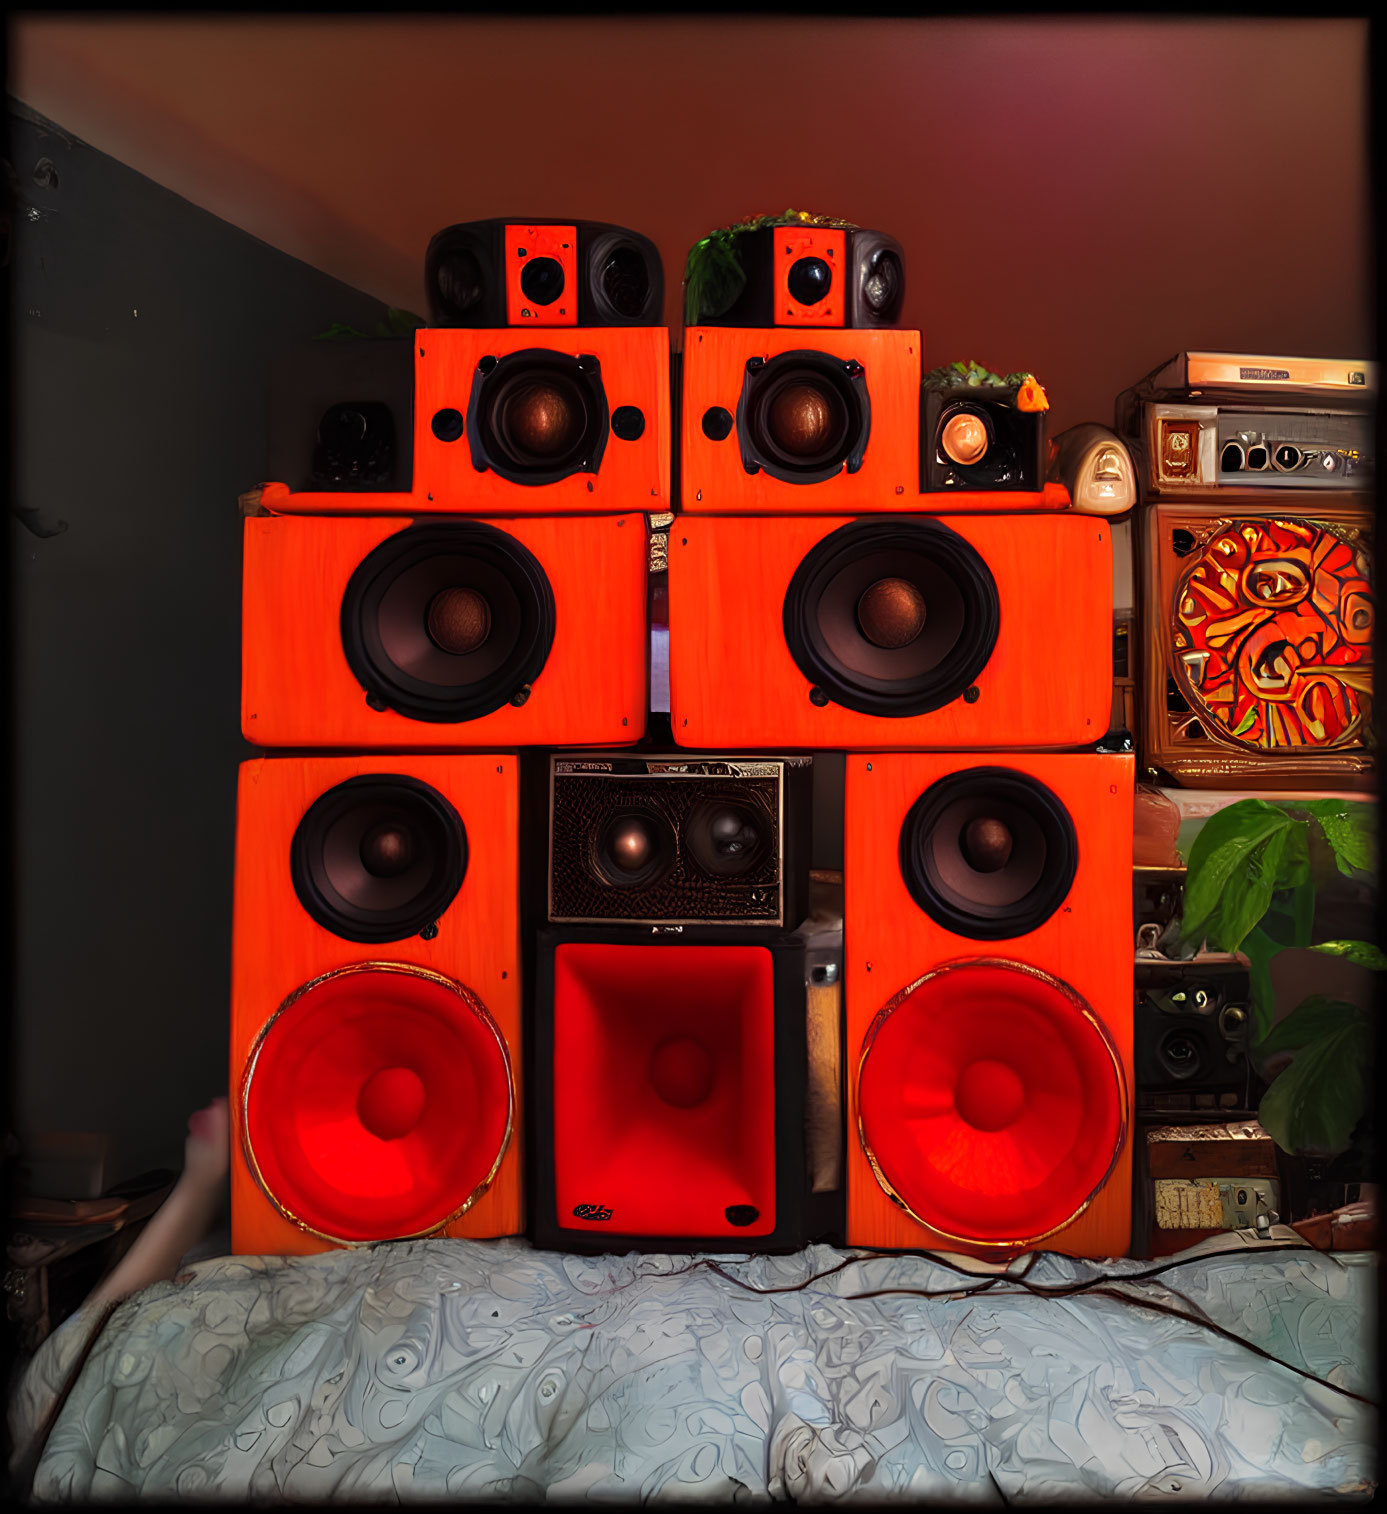 Colorful Speaker Setup Above Bed with Houseplants and Eclectic Decor